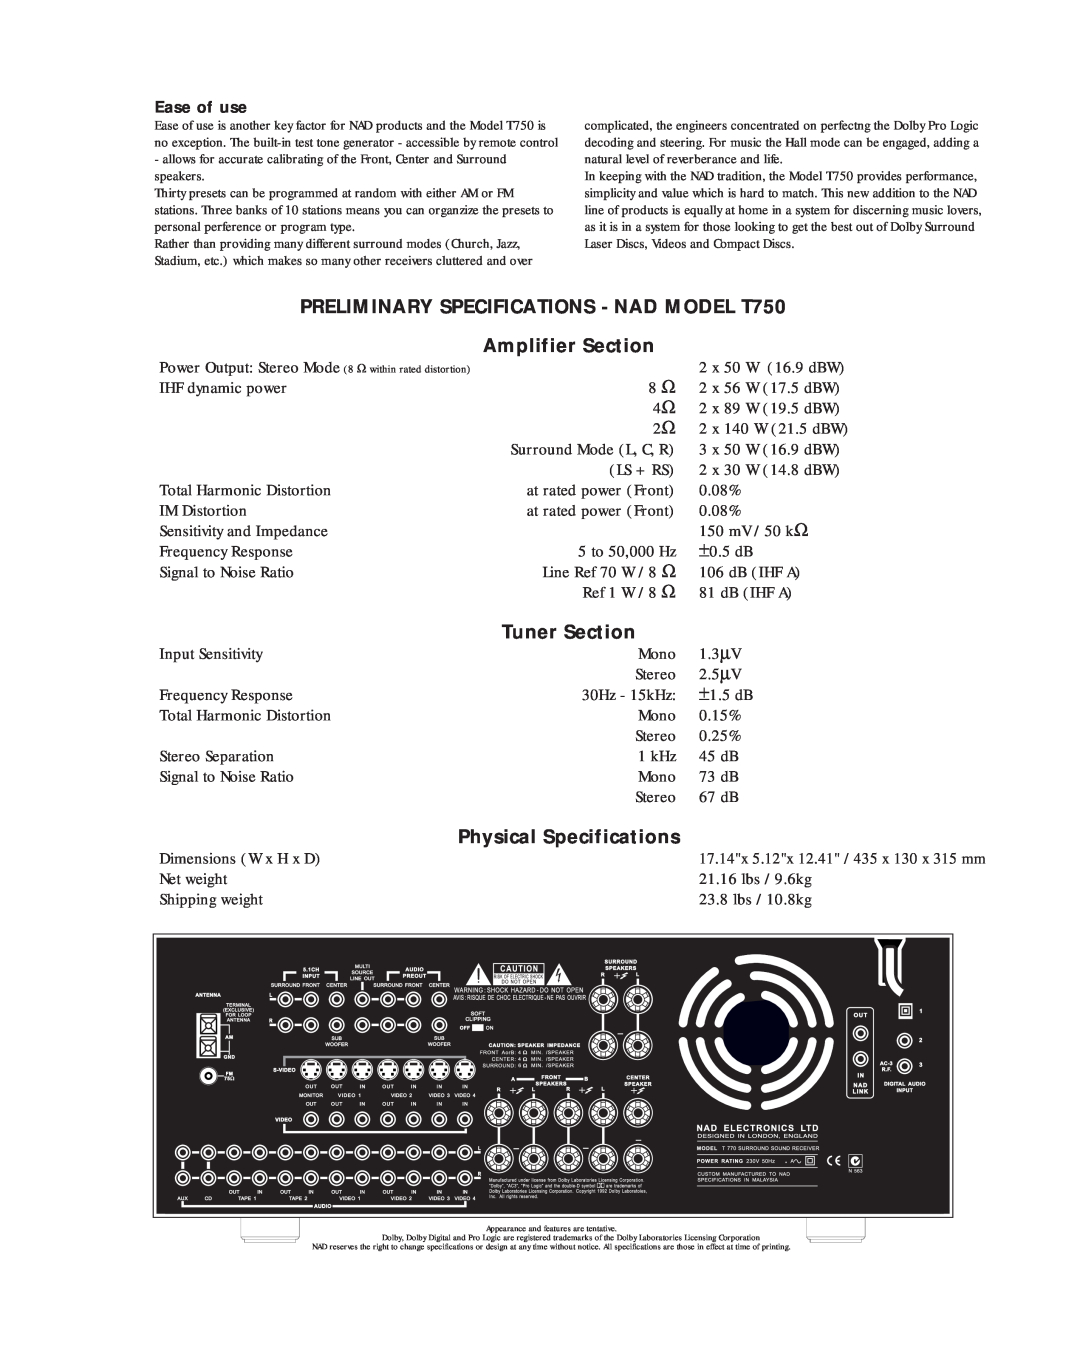 NAD brochure PRELIMINARY SPECIFICATIONS - NAD MODEL T750, Amplifier Section, Tuner Section, Physical Specifications 